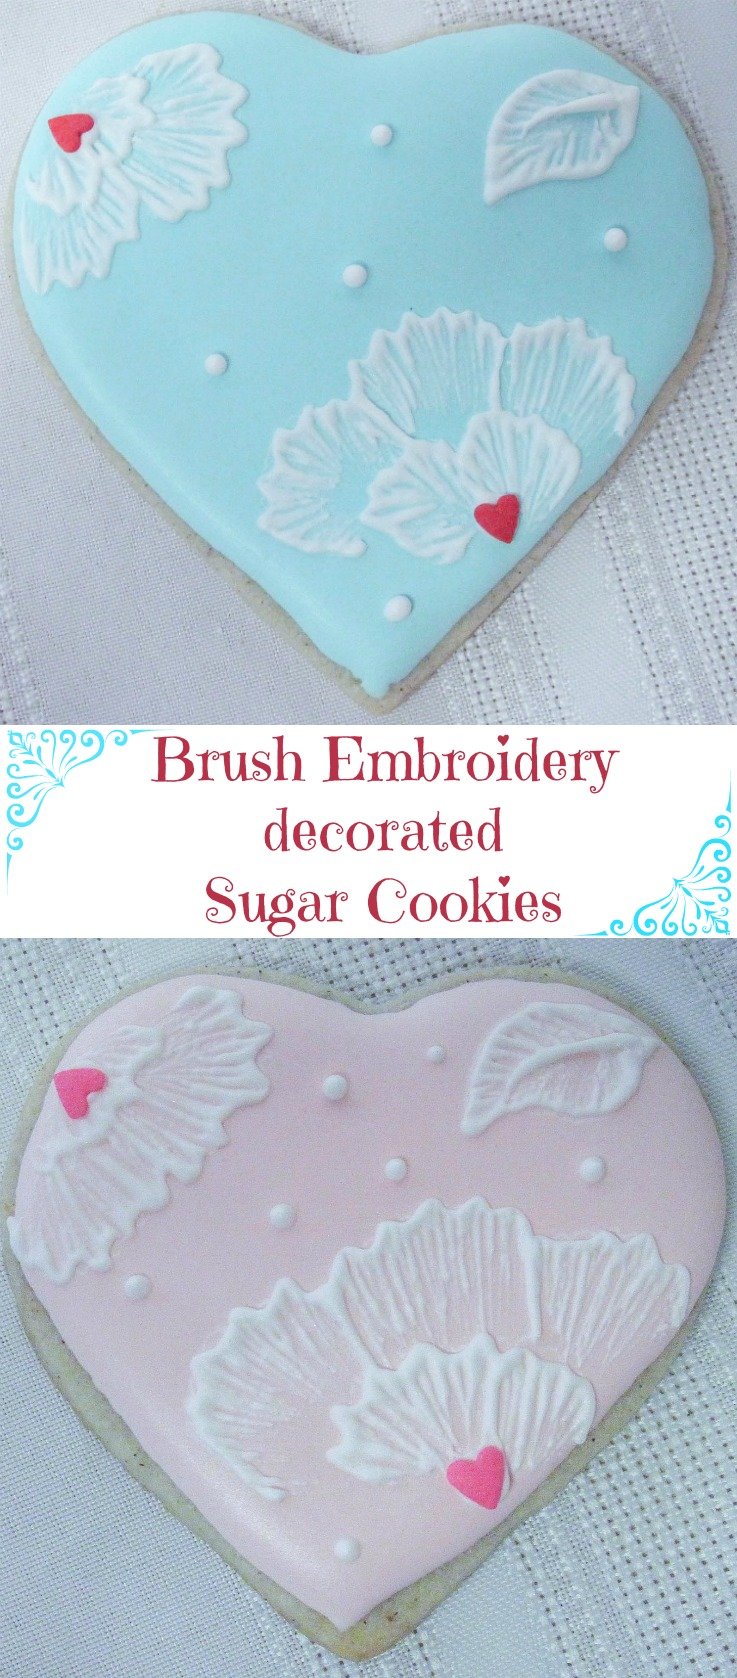 Beautifully decorated sugar cookies for Valentine's Day. Sugar cookies make the perfect edible treat to package nicely and give as gifts. via @artandthekitch